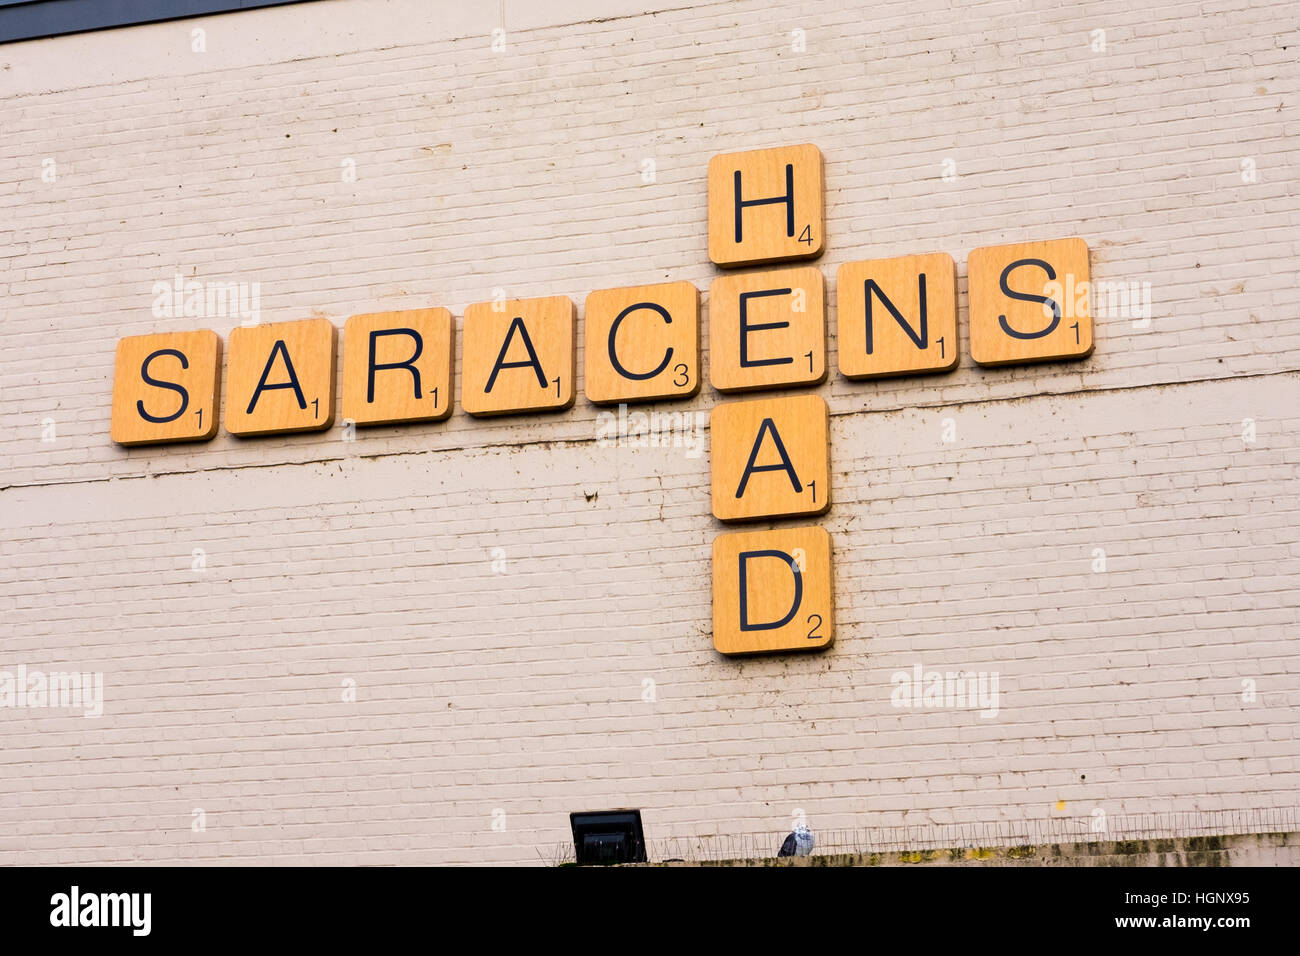 'Supersize Scrabble' - Local business uses giant scrabble tiles for their pub sign Stock Photo